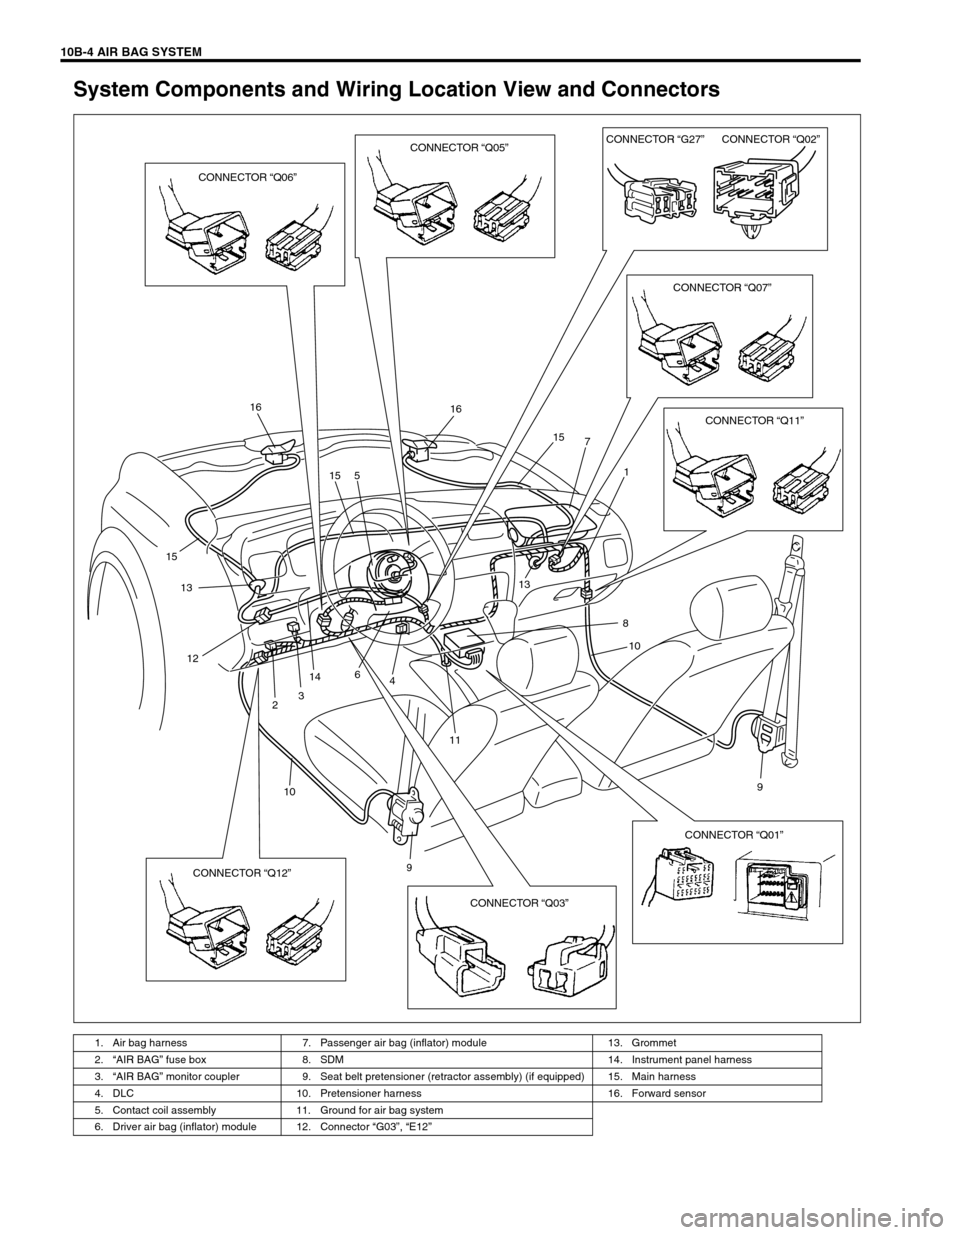 SUZUKI GRAND VITARA 2001 2.G Owners Manual 10B-4 AIR BAG SYSTEM
System Components and Wiring Location View and Connectors
1. Air bag harness  7. Passenger air bag (inflator) module 13. Grommet
2.“AIR BAG” fuse box 8. SDM 14. Instrument pan